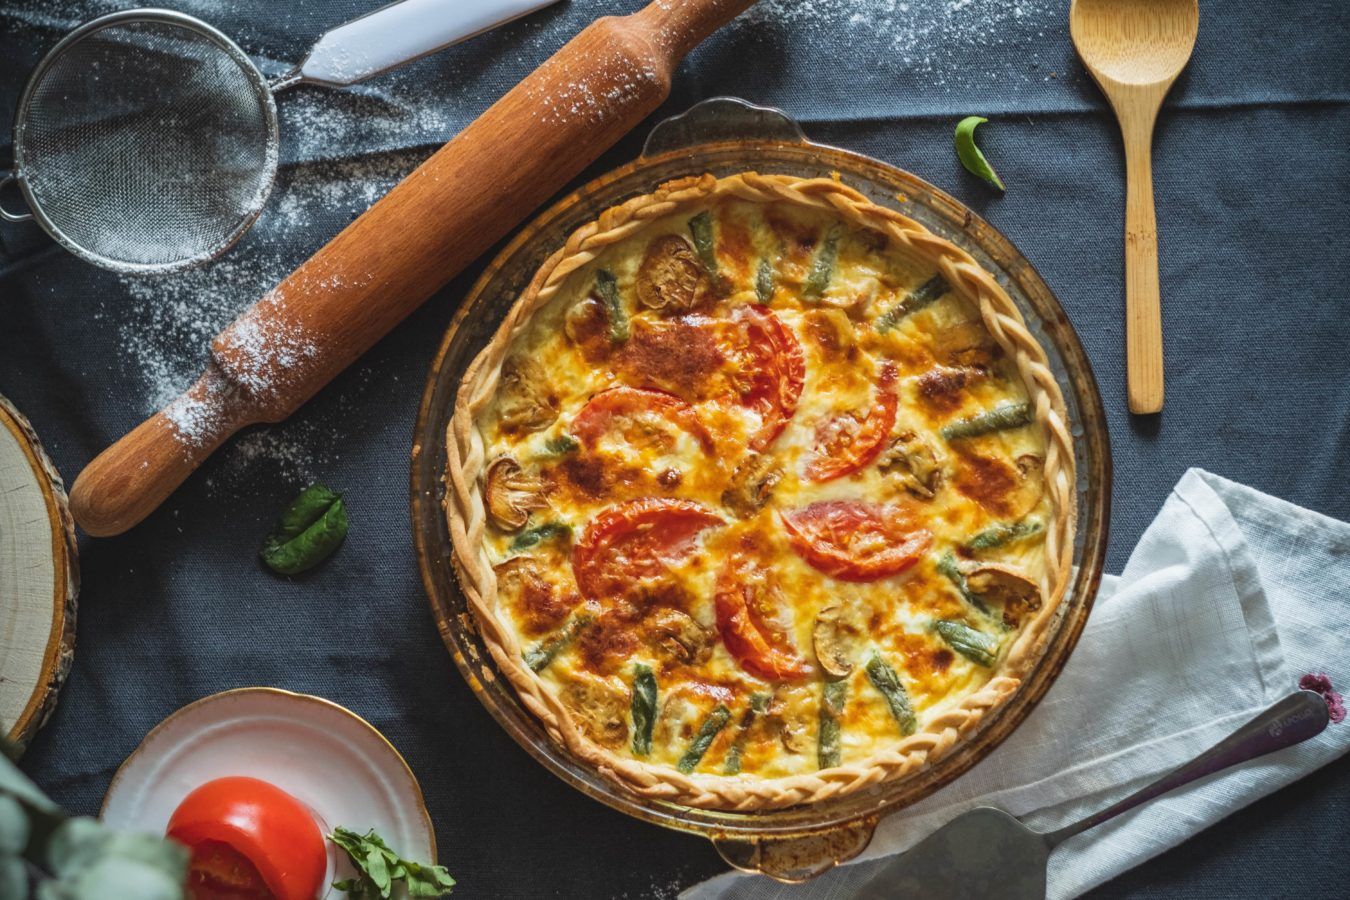 The 7 most important rules for making quiche